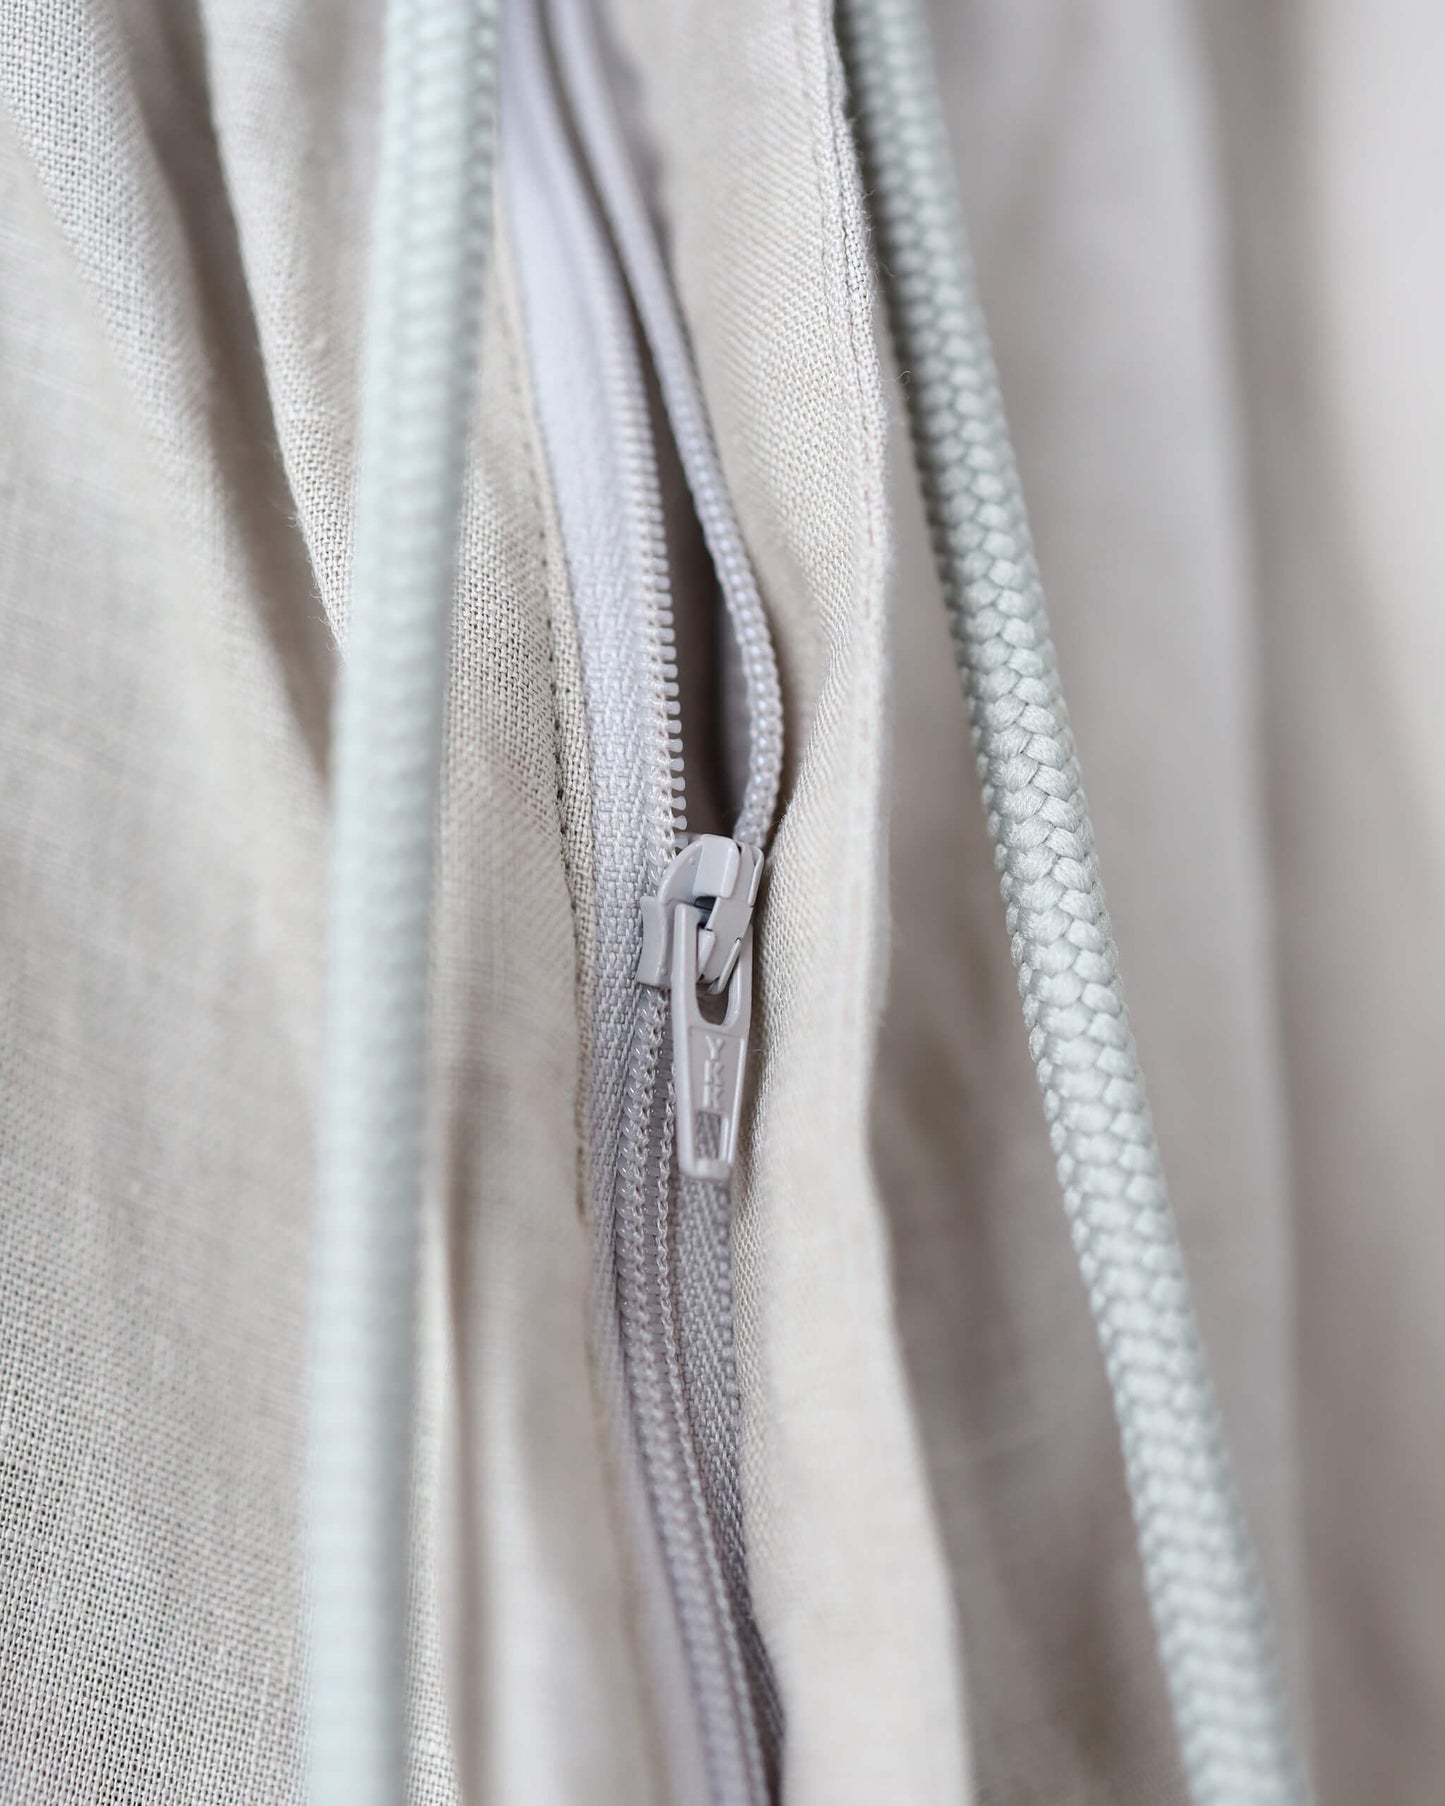 EASY ARMY TROUSERS HEMP SHIRTING "TAUPE"